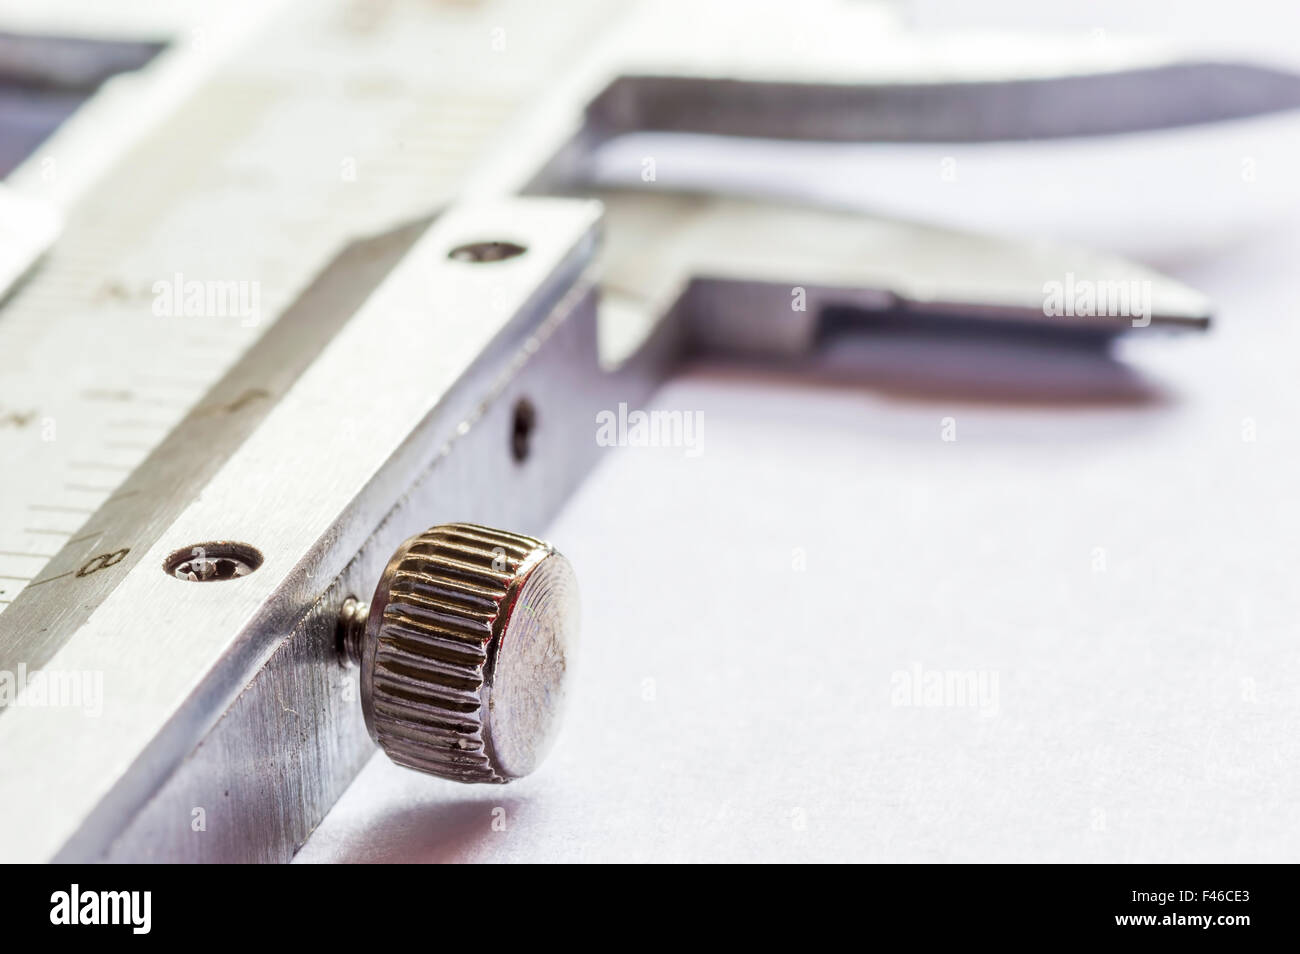 vernier calipers close up with natural lighting Stock Photo